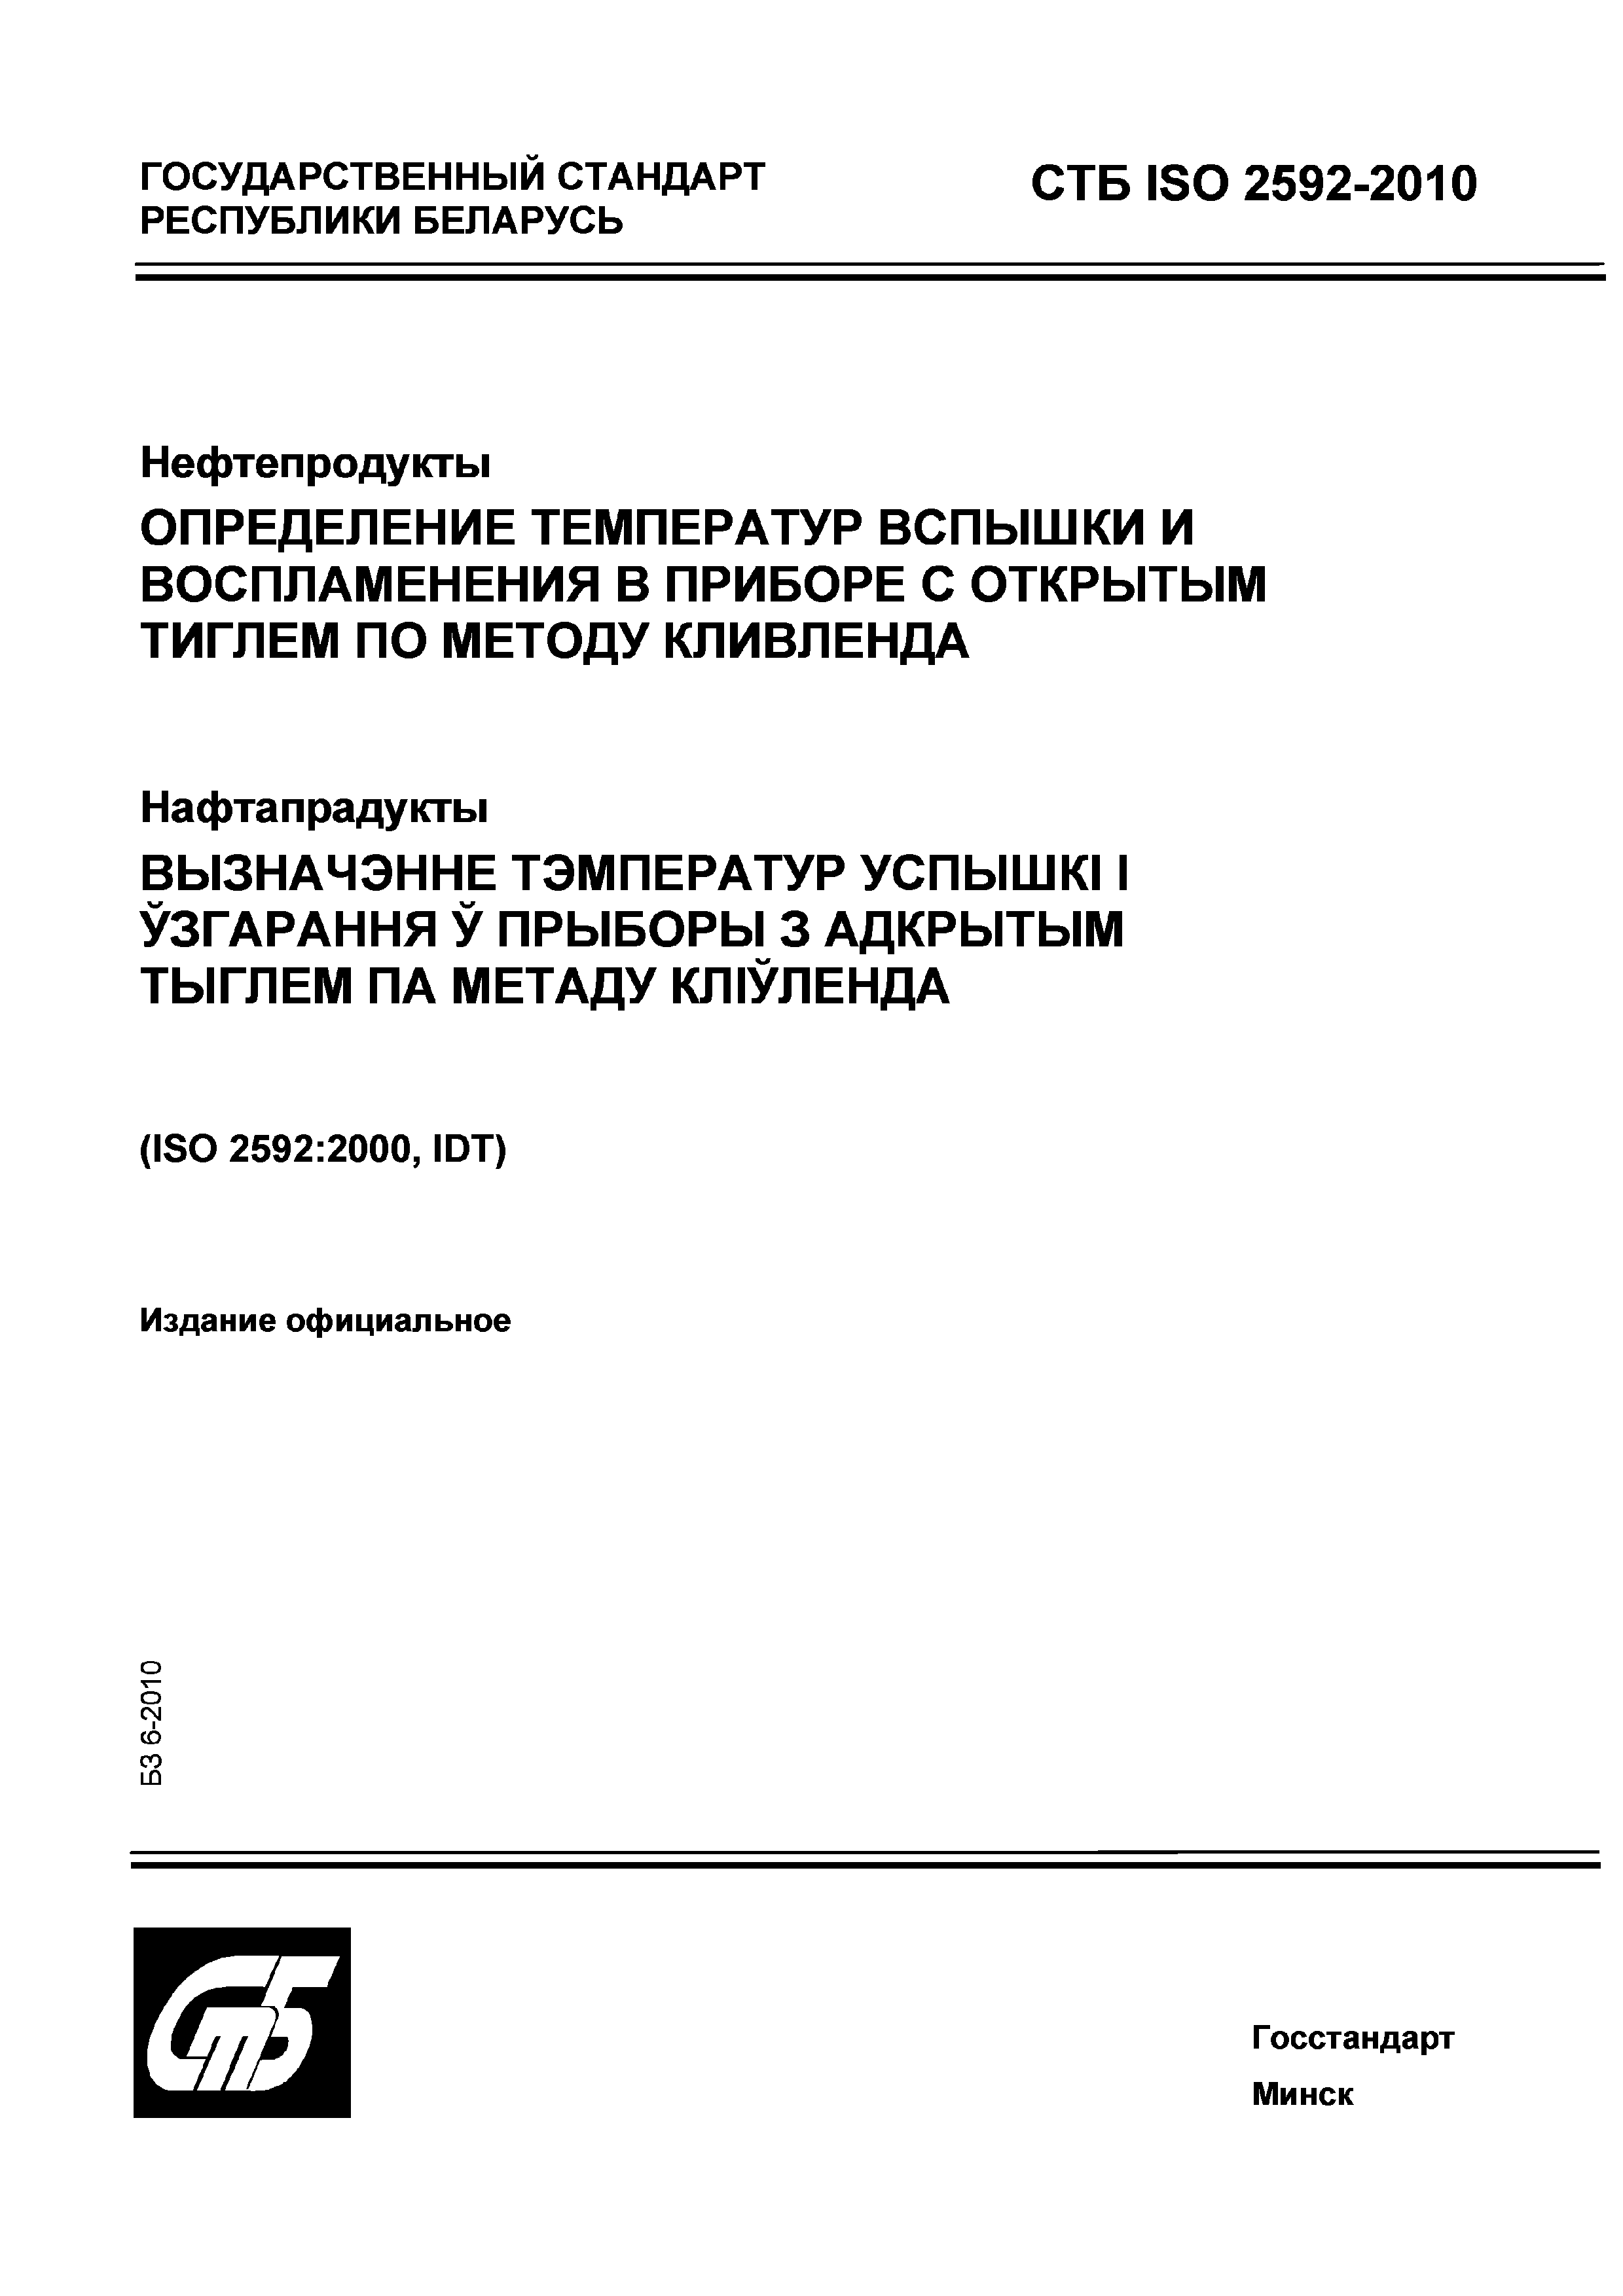 СТБ ISO 2592-2010